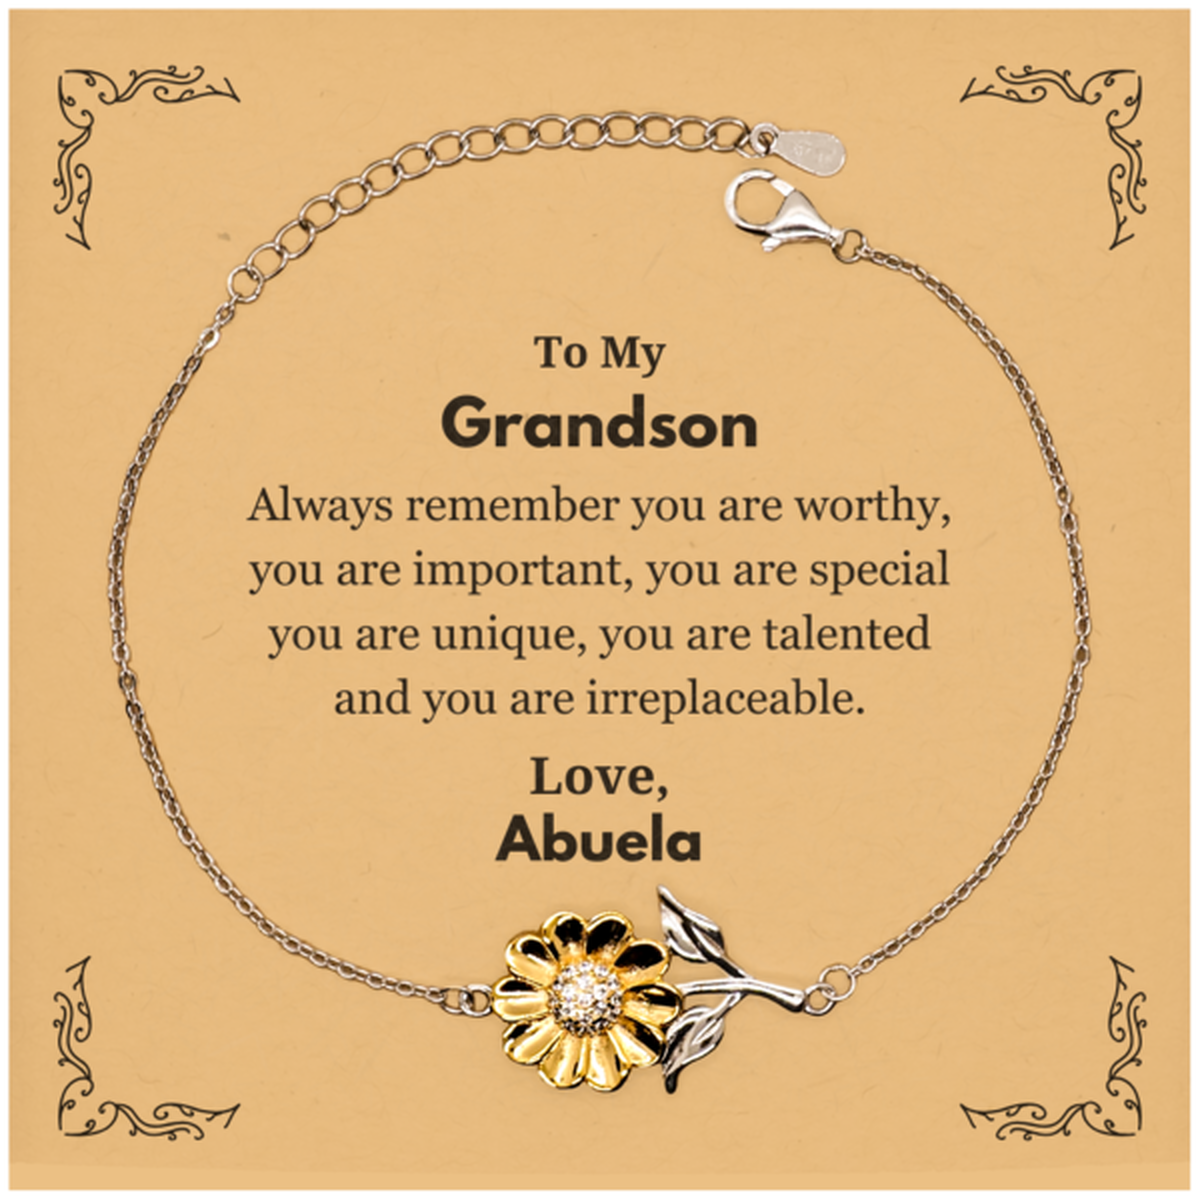 Grandson Birthday Gifts from Abuela, Inspirational Sunflower Bracelet for Grandson Christmas Graduation Gifts for Grandson Always remember you are worthy, you are important. Love, Abuela